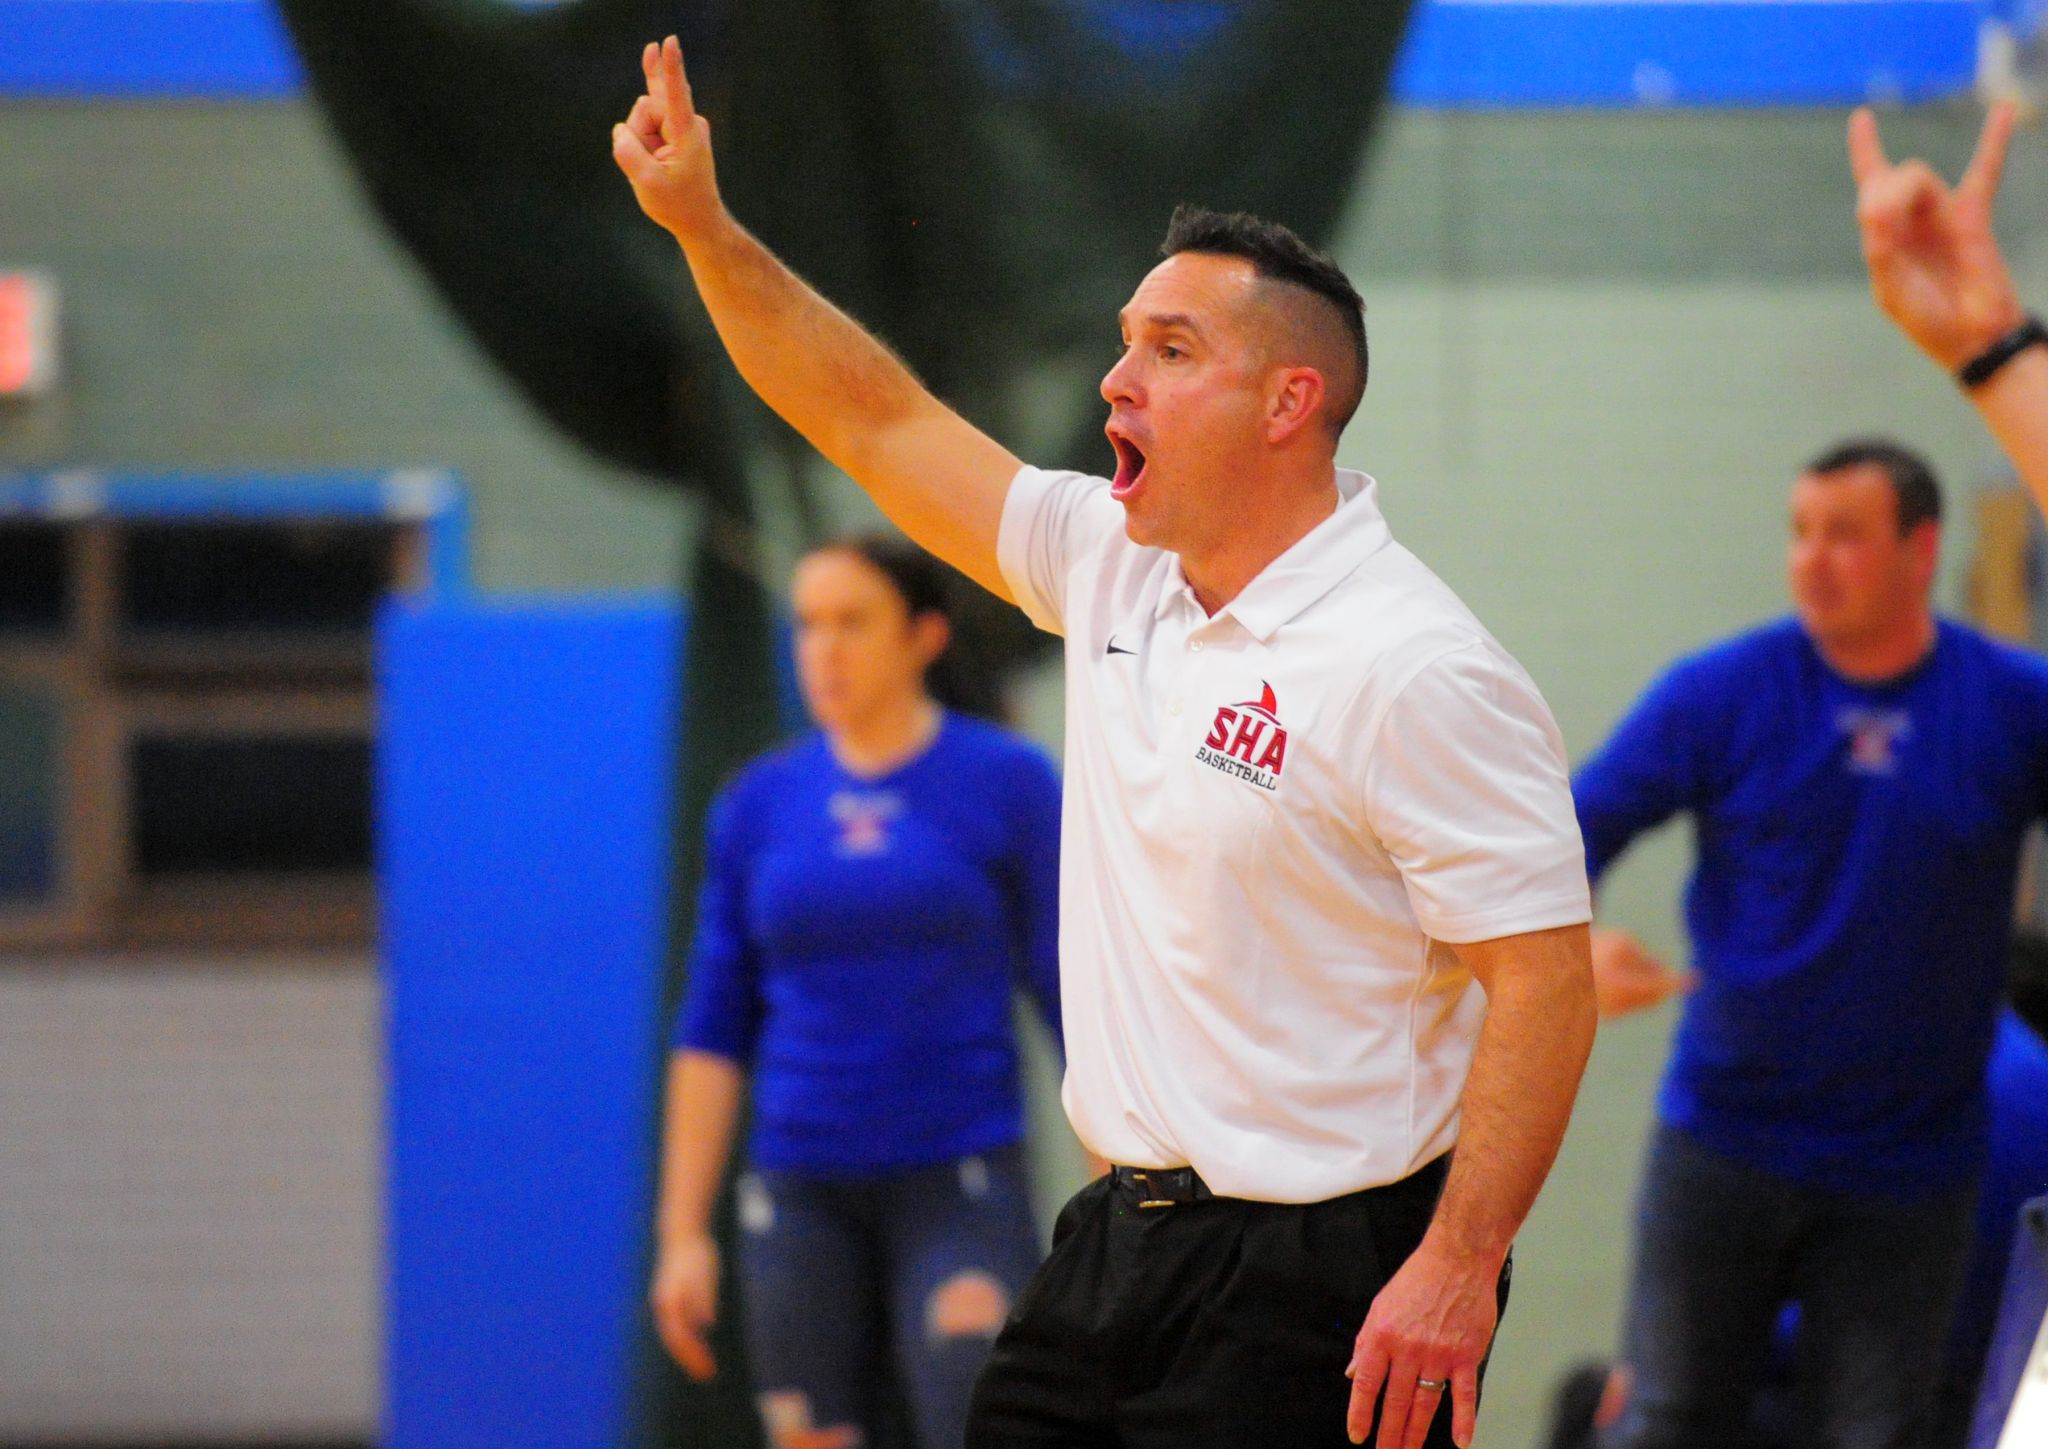 sacred-heart-academy-apologizes-suspends-coach-after-92-4-girls